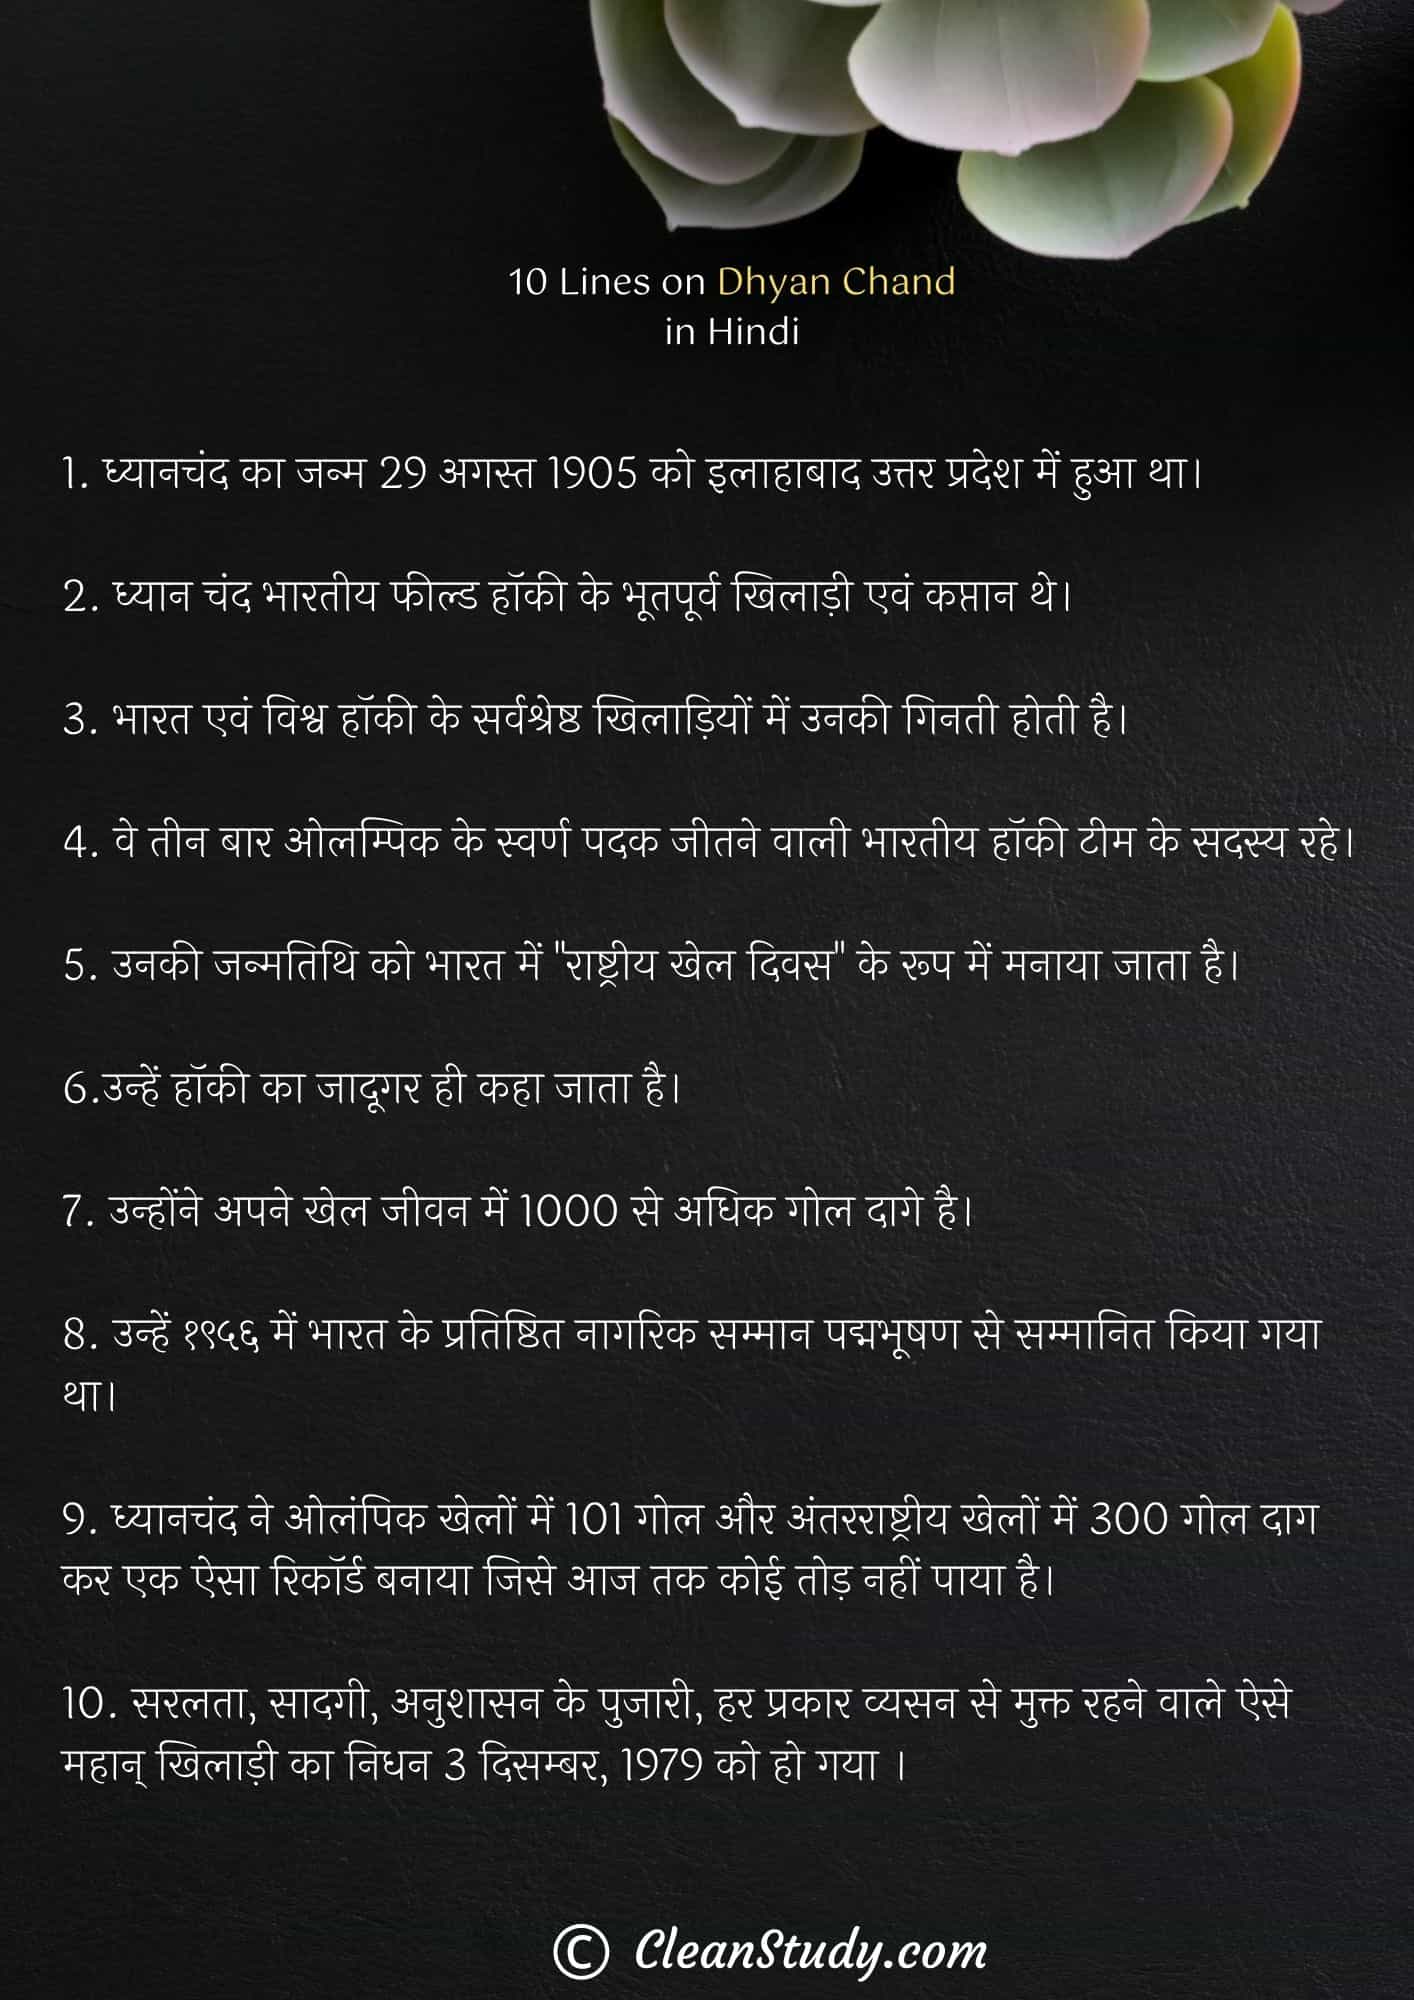 10 Lines on Dhyan Chand in Hindi